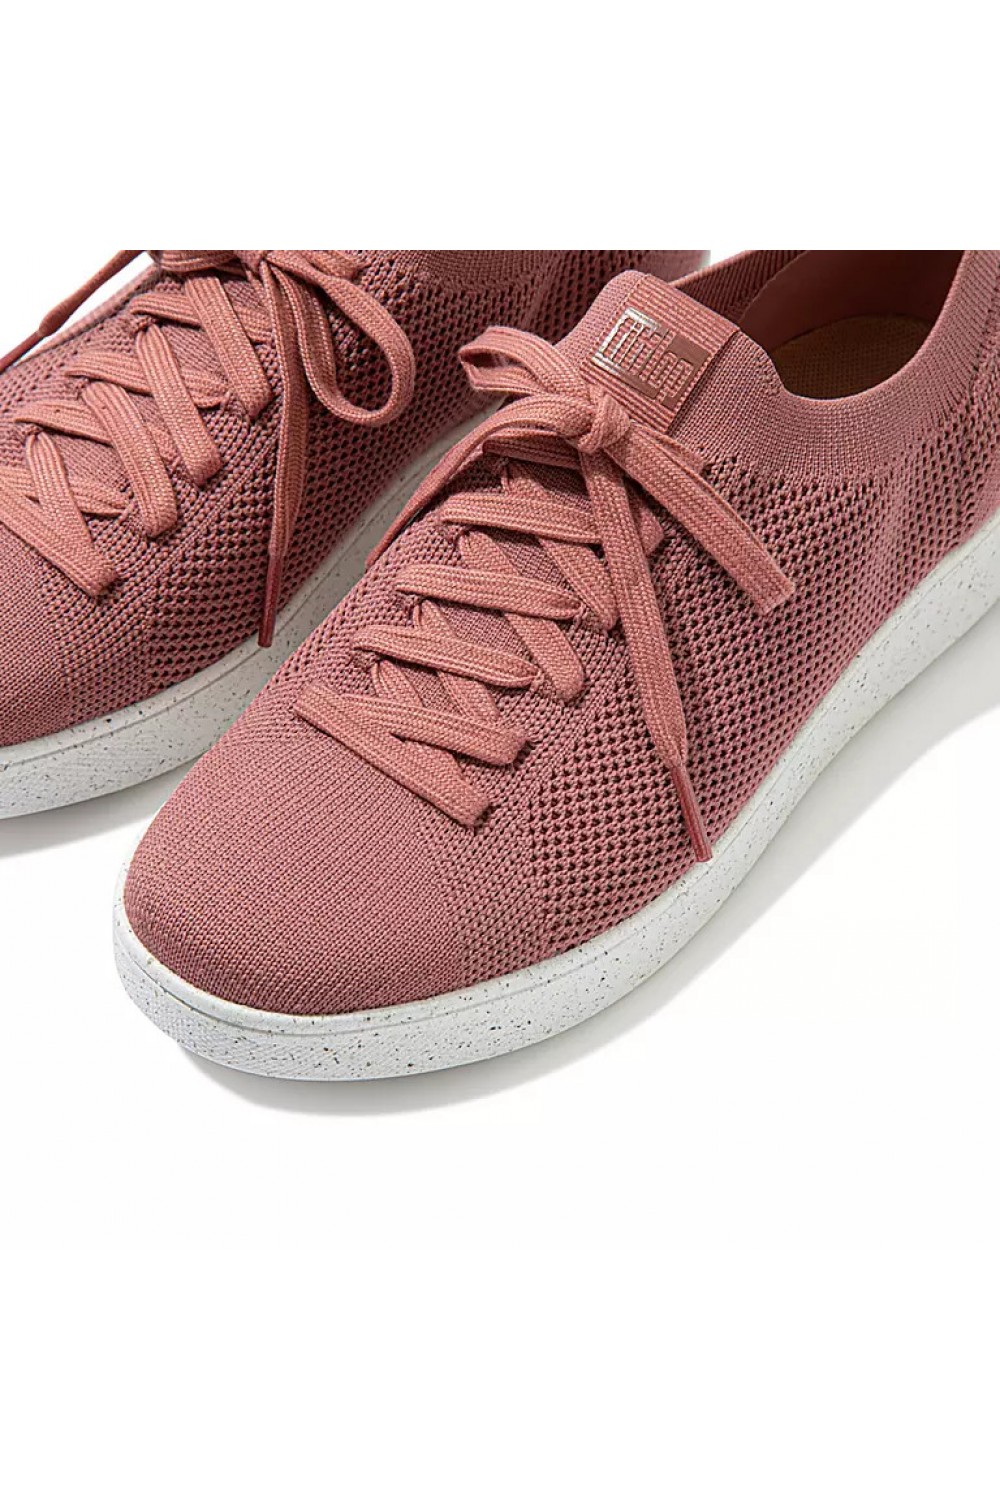 Fitflop Rally E01 Multi-Knit Trainers Warm Rose